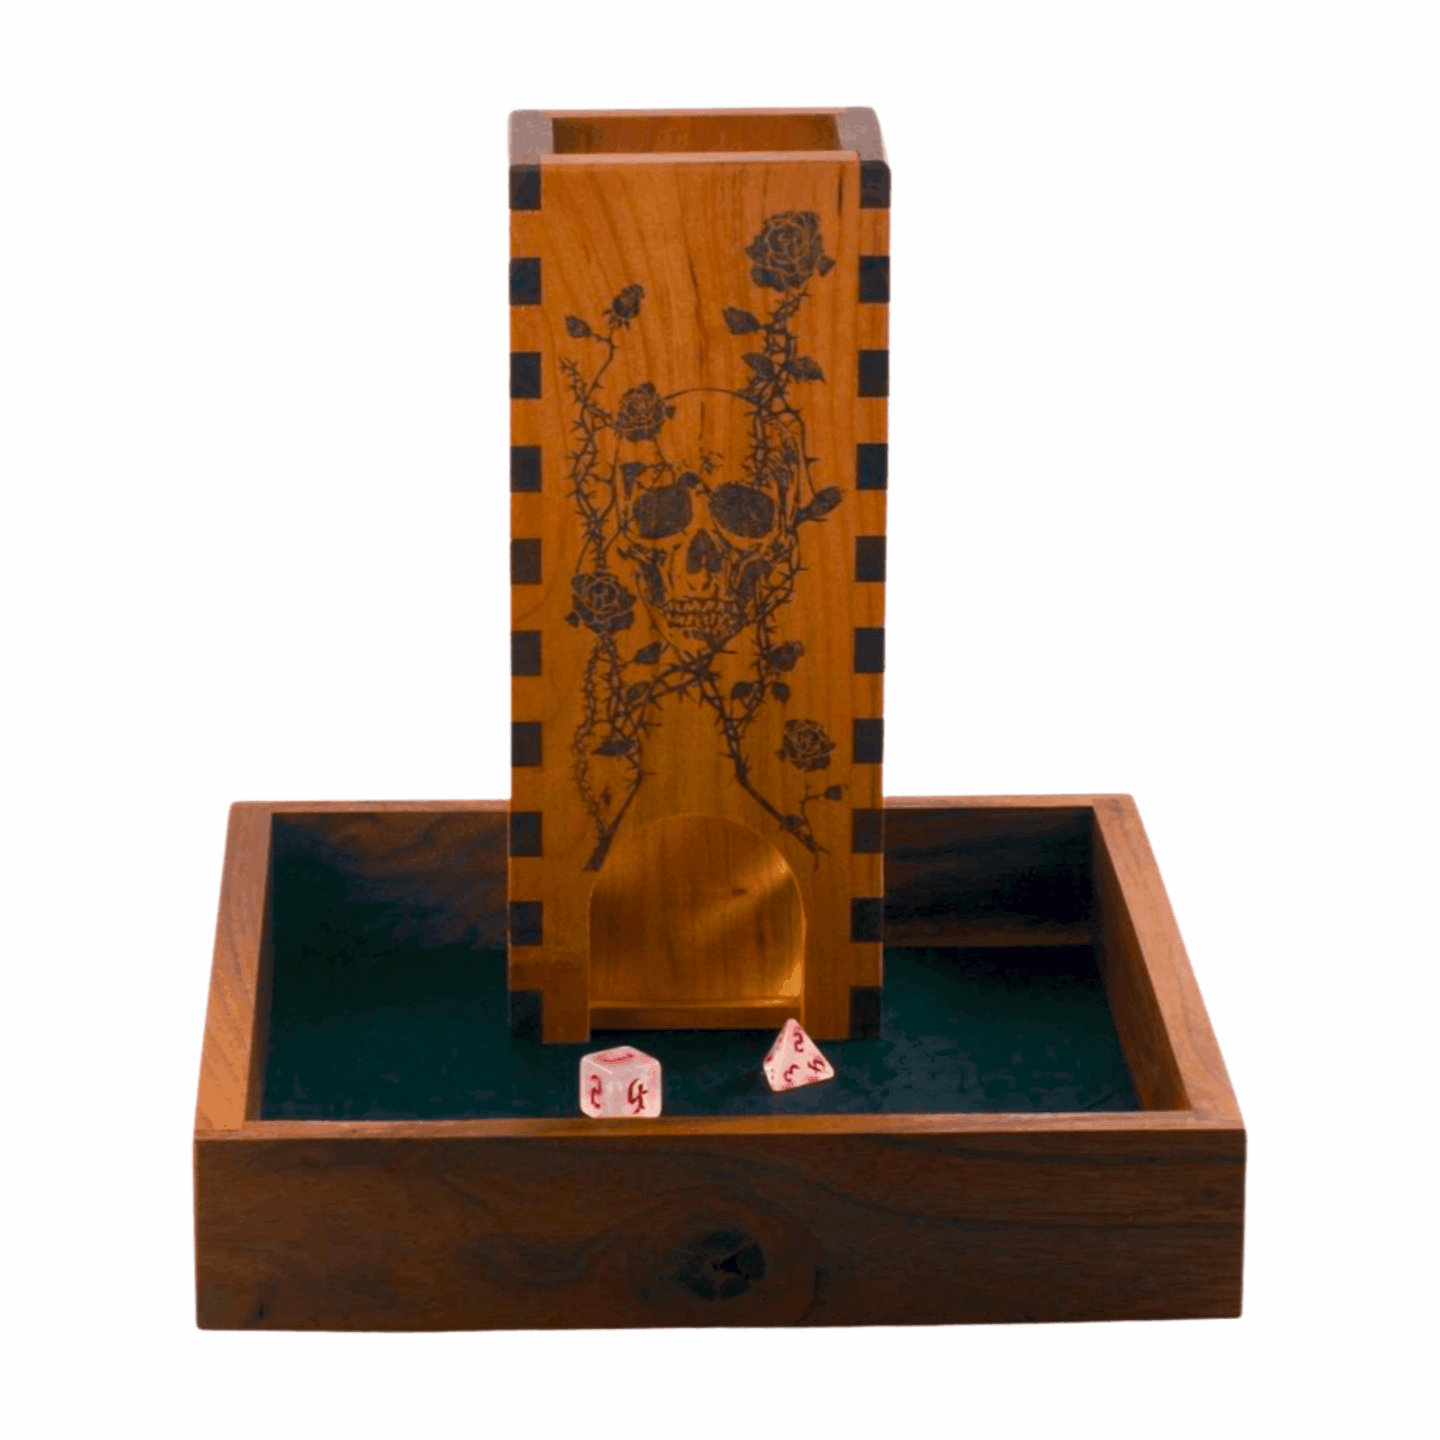 Skull and Roses Skeleton Tower in Wooden Dice Tray with 2 white dice